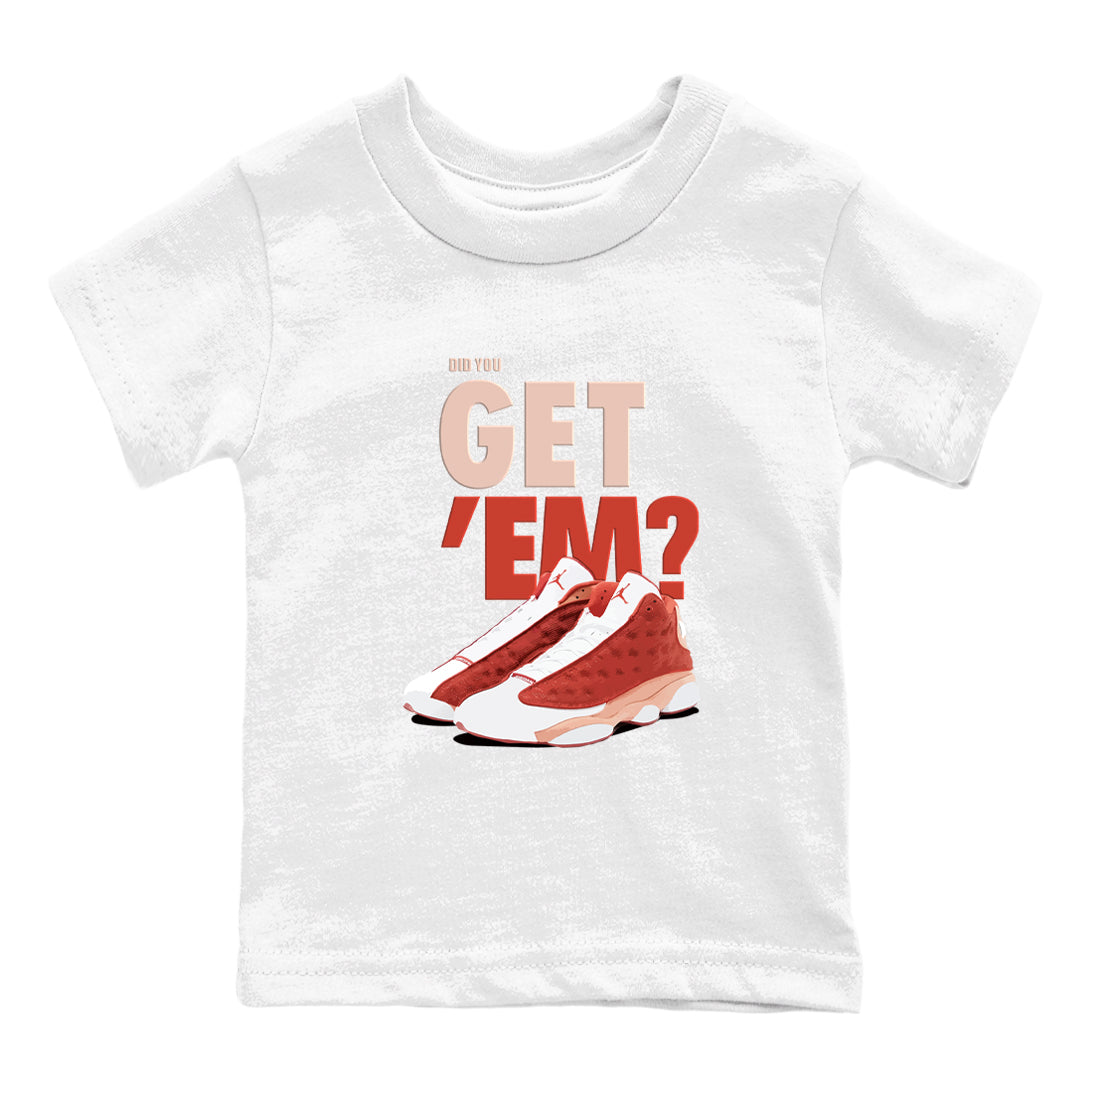 13s Dune Red shirts to match jordans Did You Get 'Em sneaker match tees Air Jordan 13 Dune Red SNRT Sneaker Tees streetwear brand Baby and Youth White 2 cotton tee